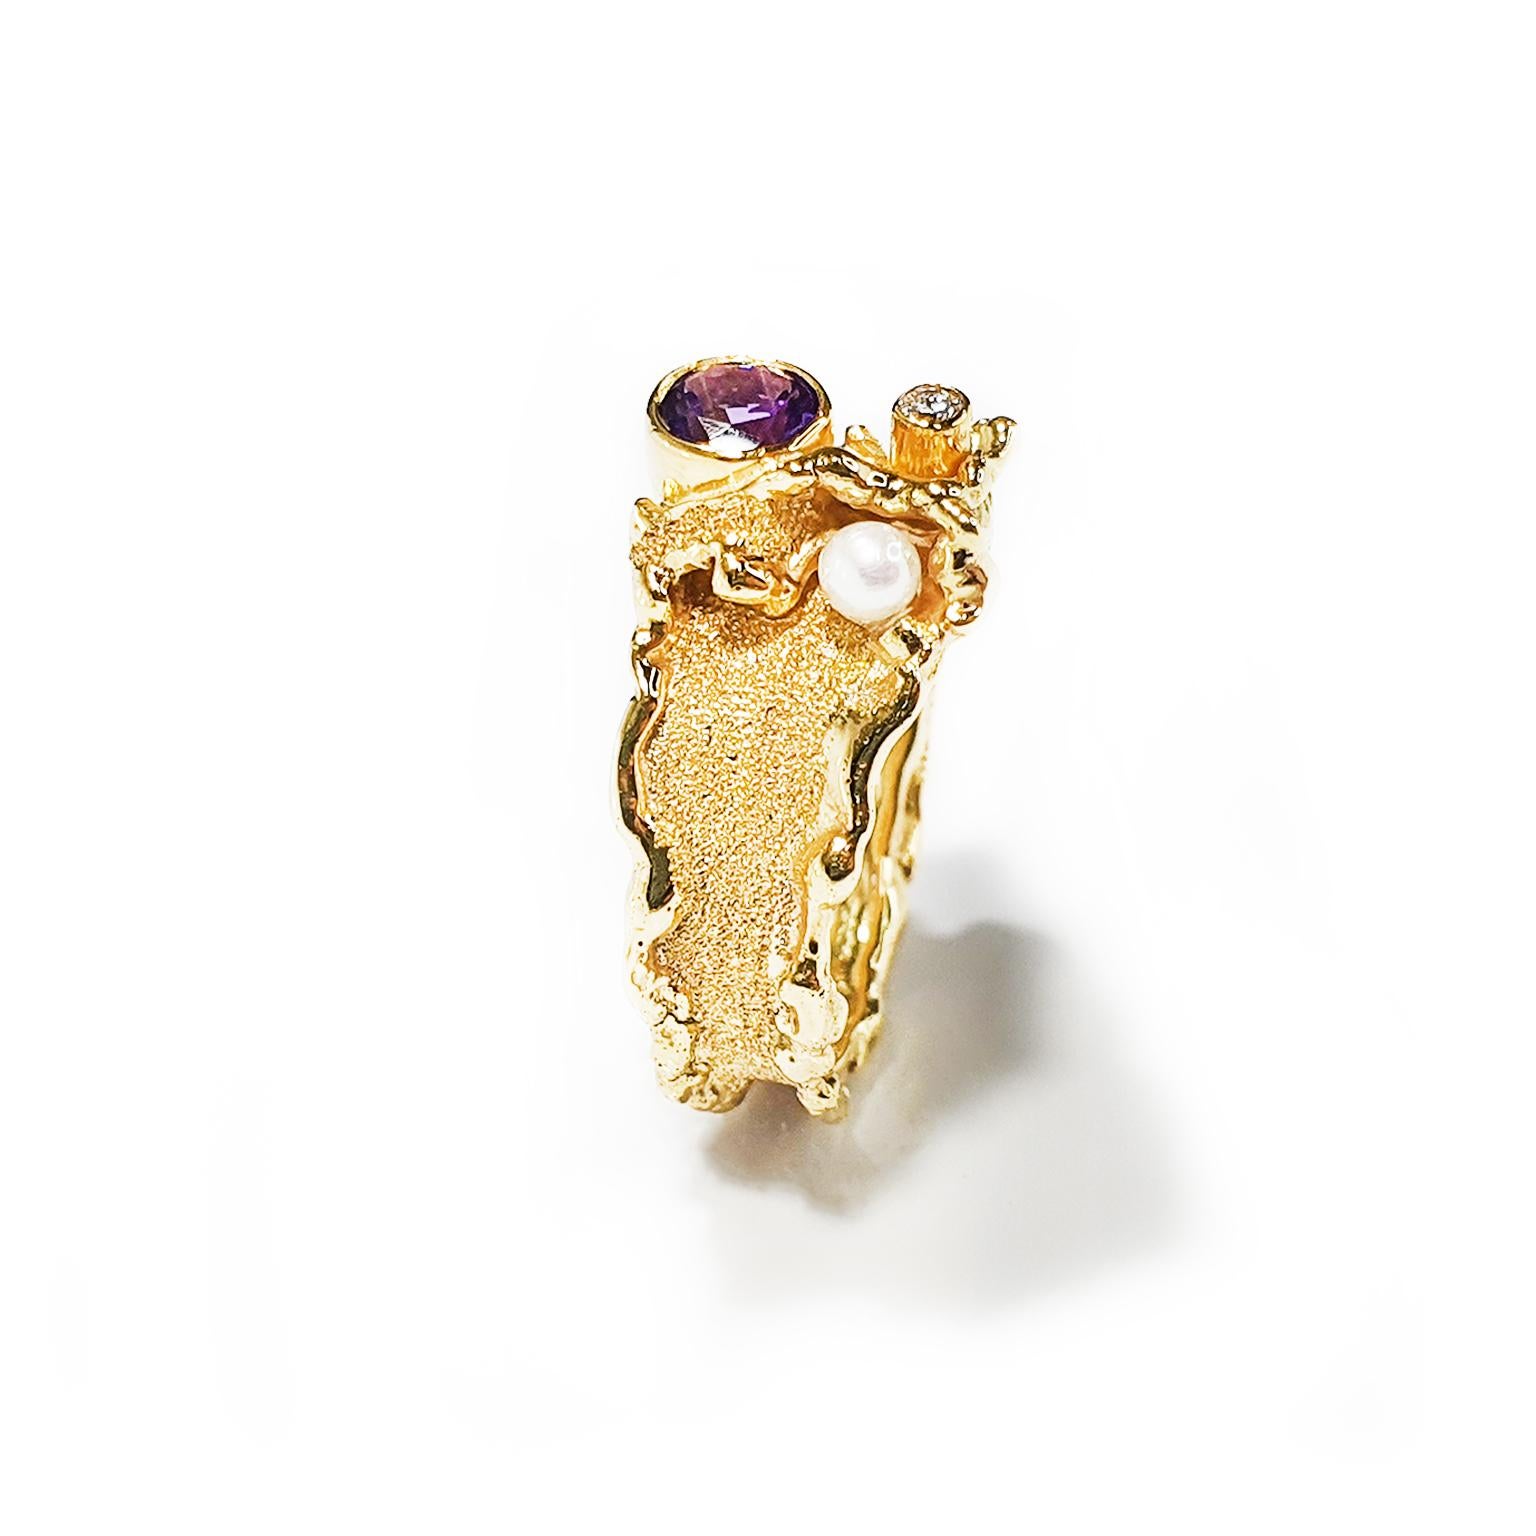 Paul Amey's 9K yellow gold diamond, pearl and amethyst ring features a 3pt diamond, a small round pearl and a 12mm round amethyst. The amethyst ring is finished with Paul Amey's signature Molten Edge finish. The ring has a total weight of 4.3 grams